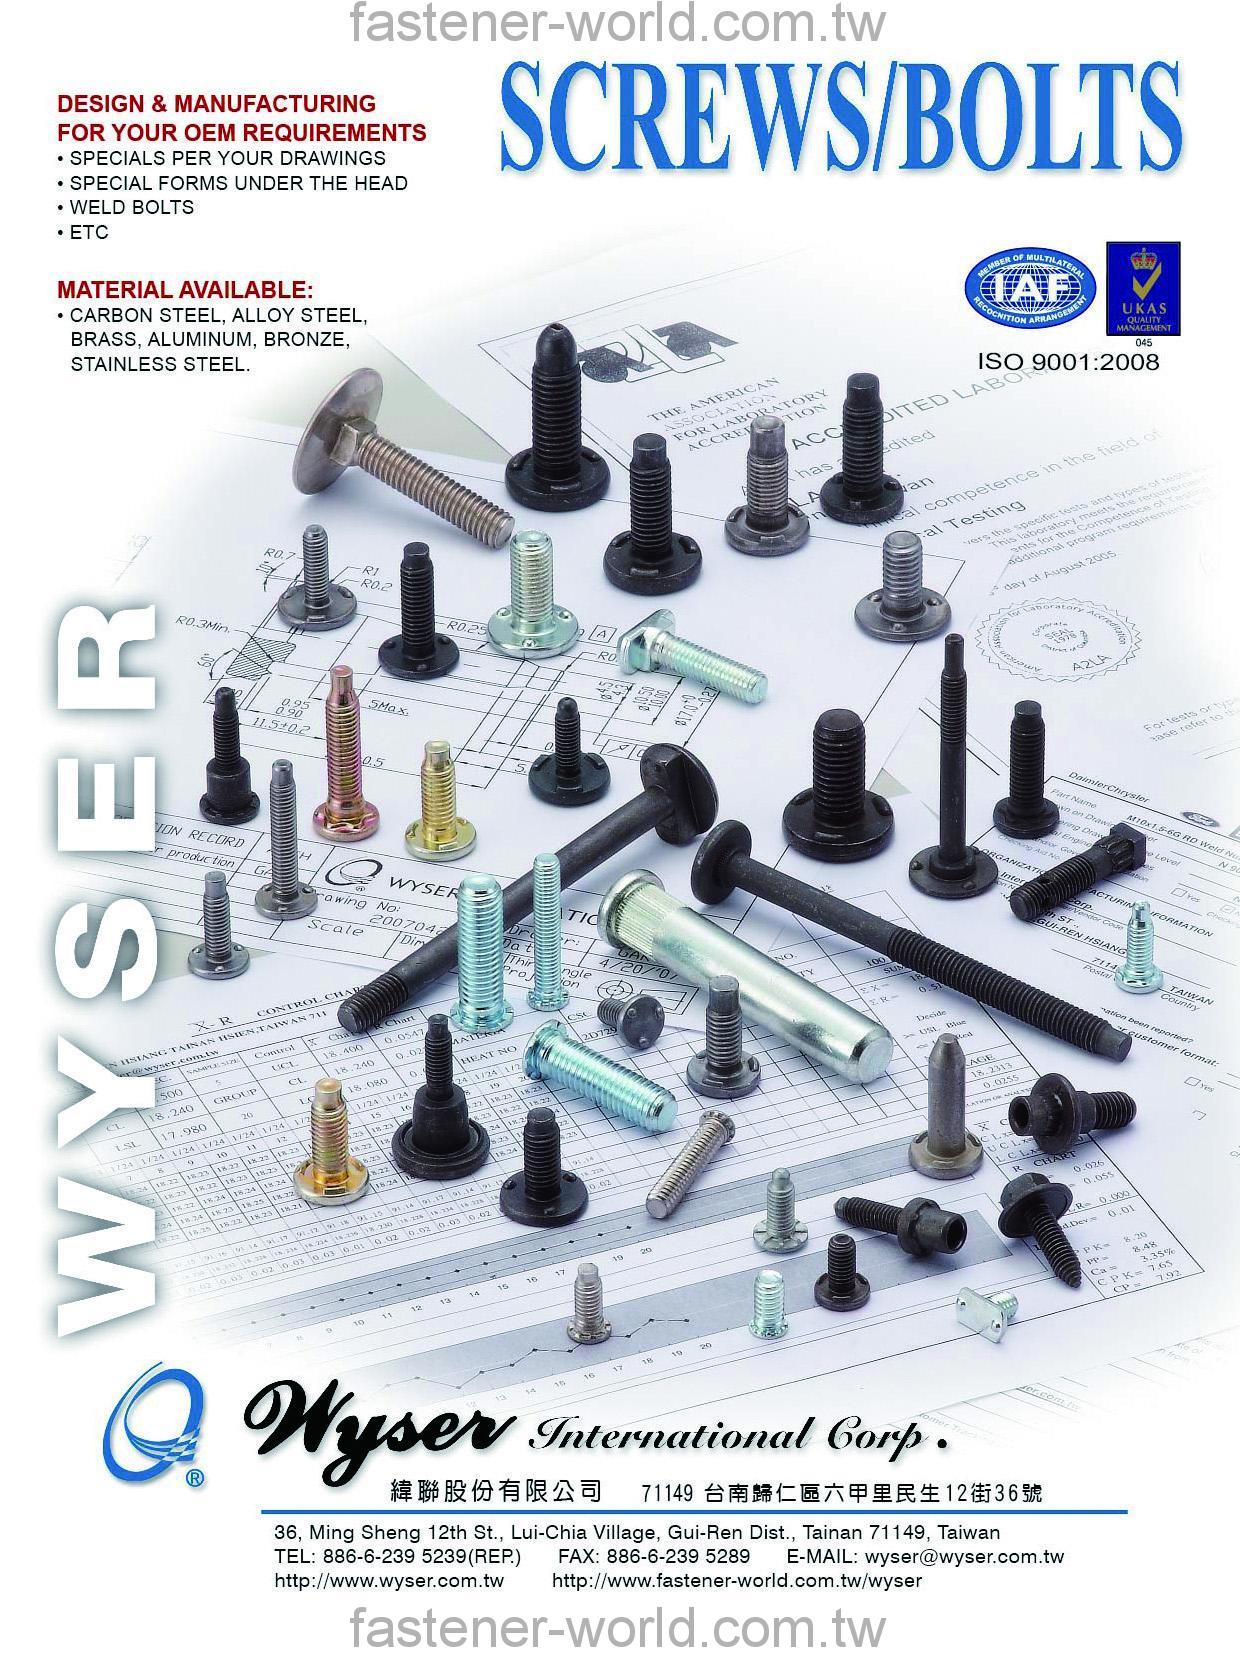 WYSER INTERNATIONAL CORP. _Online Catalogues